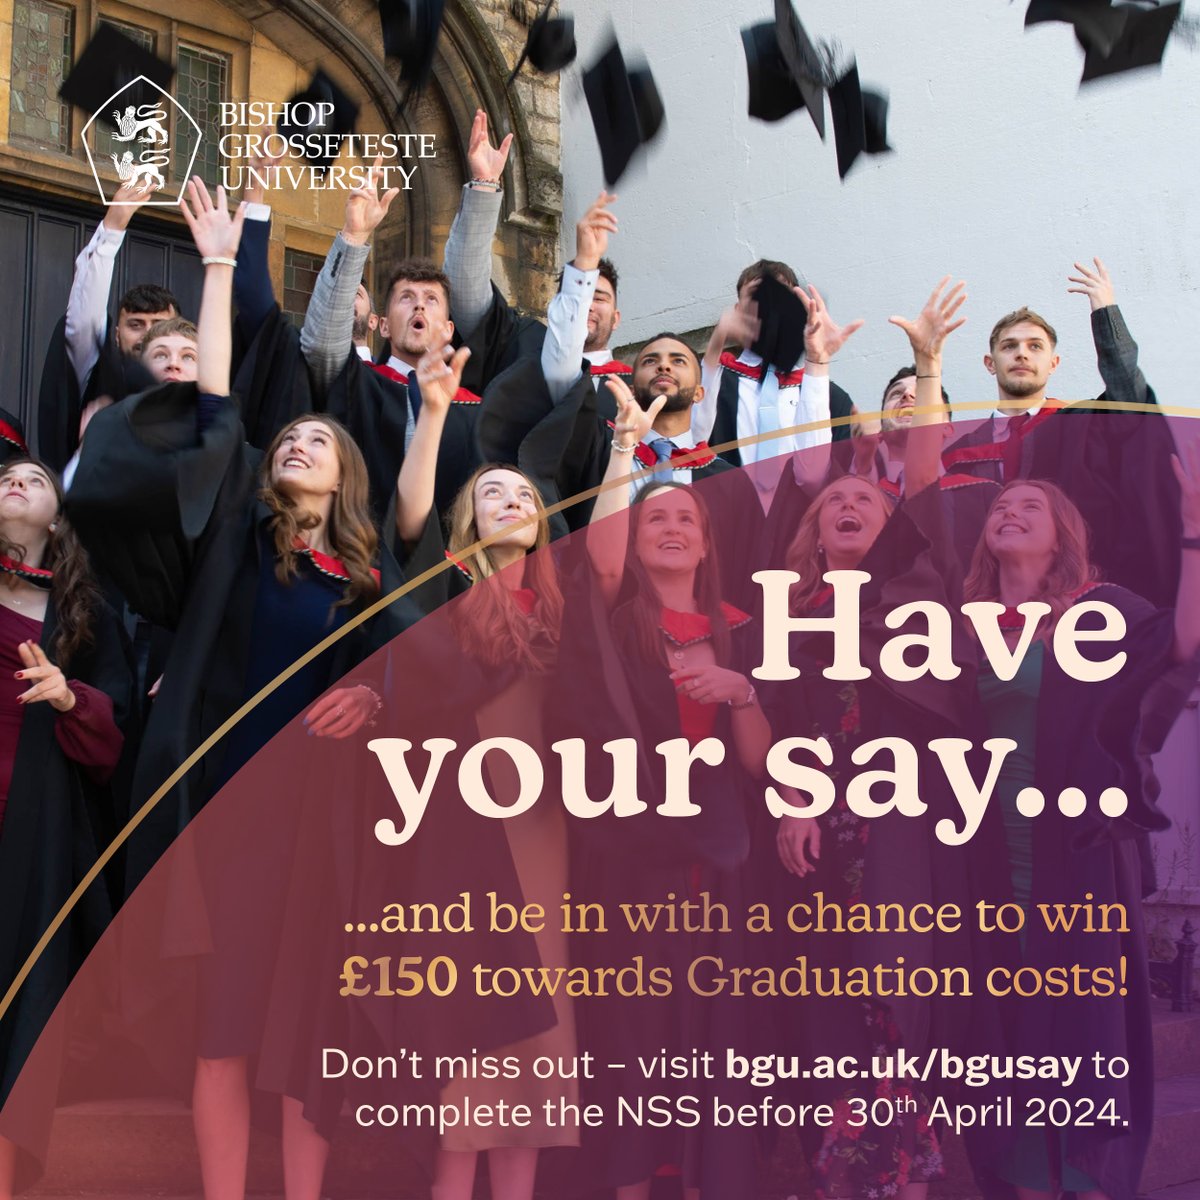 The National Student Survey (NSS) is your chance to feedback on your student experience and be in with the chance to win £150 towards Graduation costs! 😮 Completing the NSS is easy - visit our website to get started: bgu.ac.uk/student/bgu-say